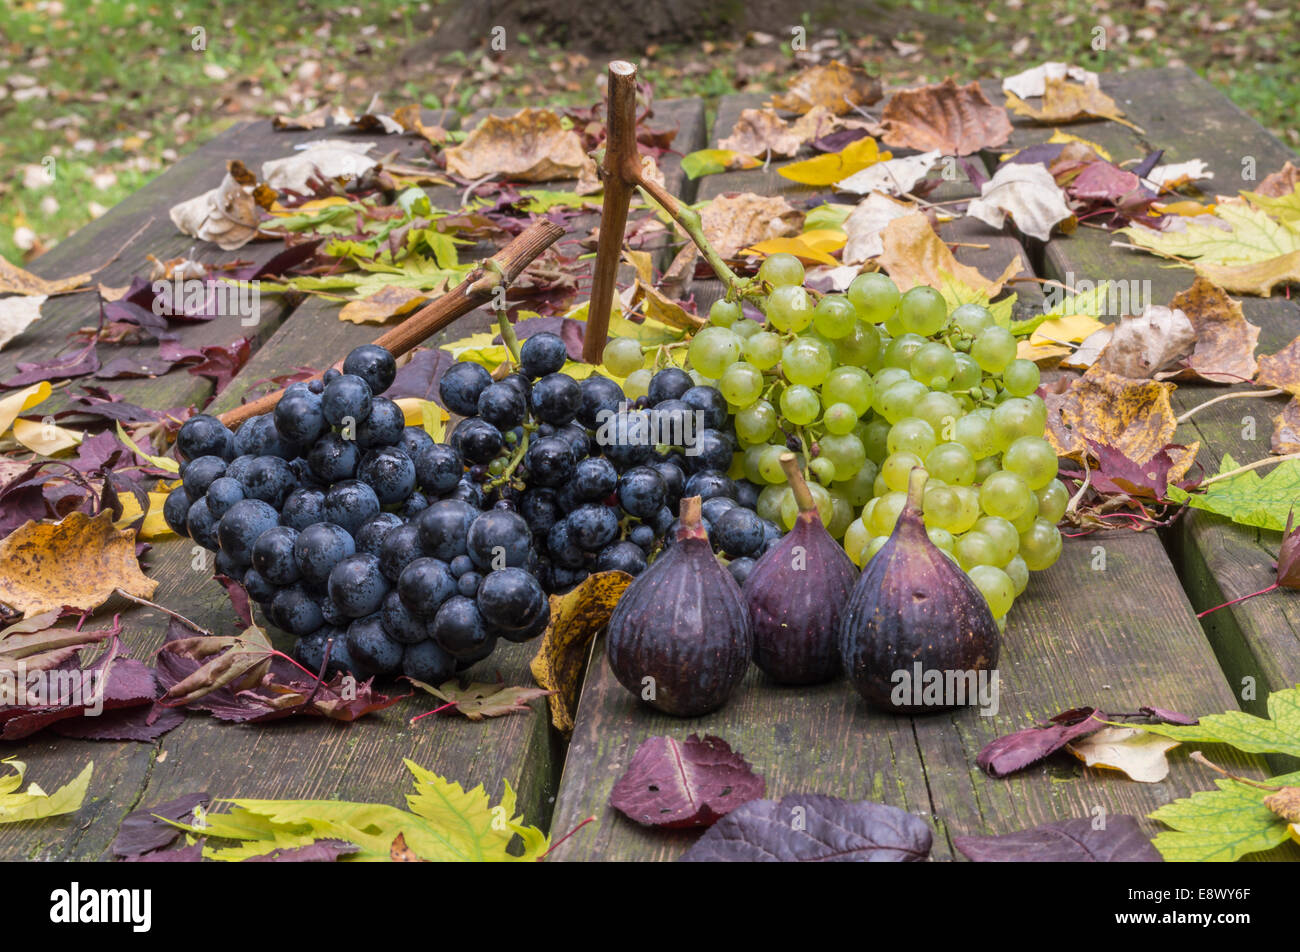 Autumn fruits: grapes and figs on a wooden table and autumn leaves Stock Photo